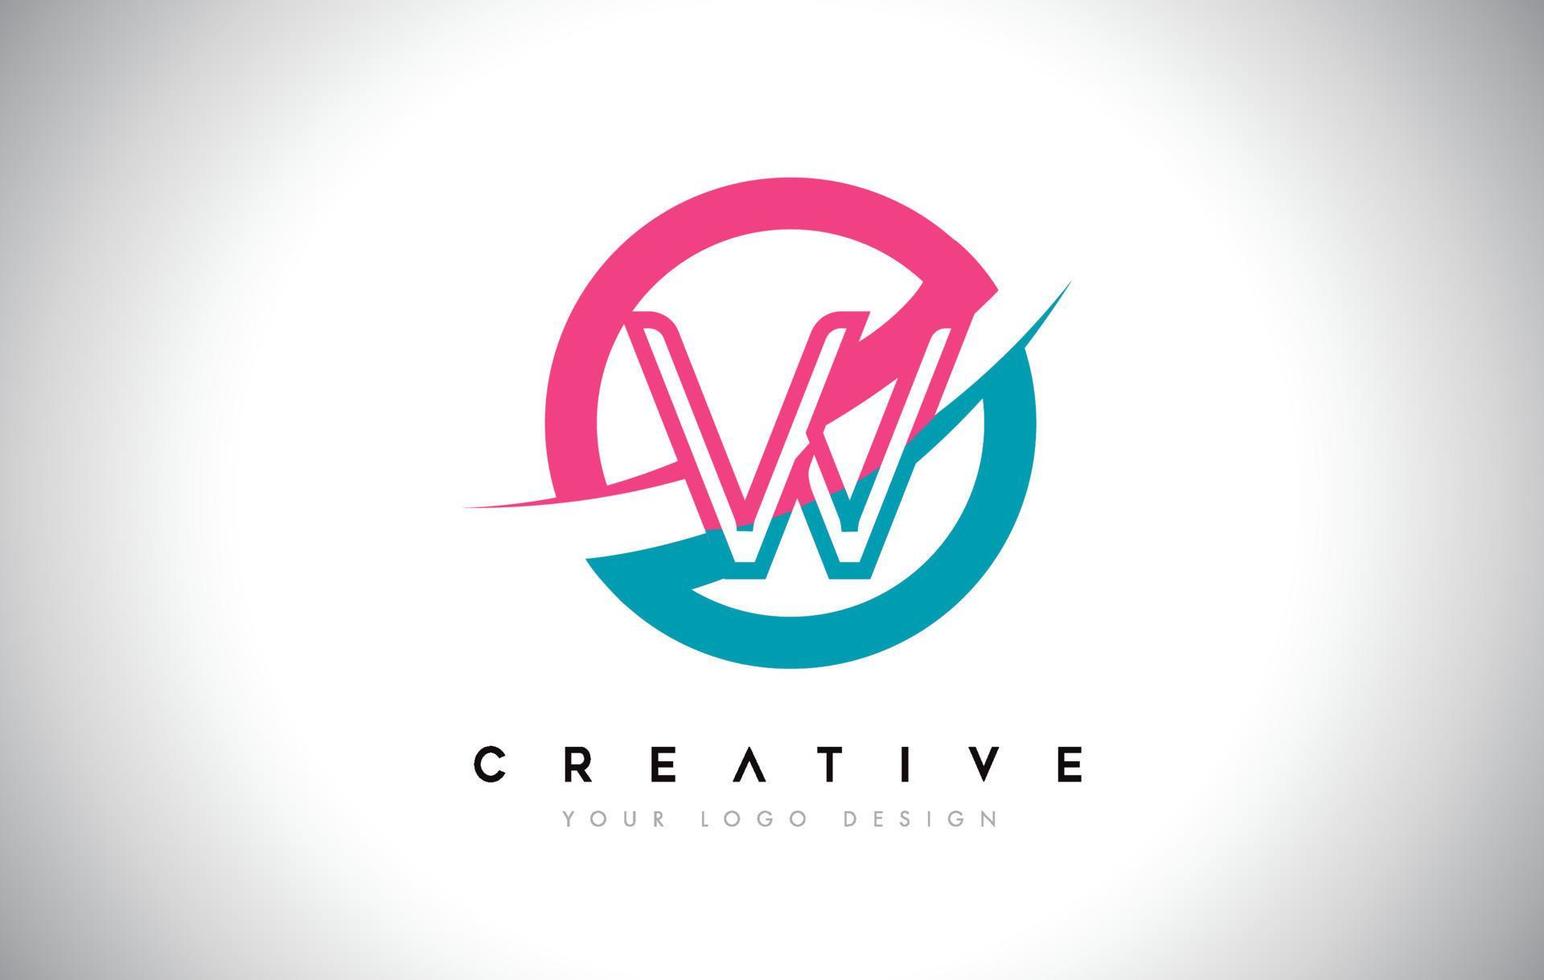 W Letter Design logo icon with circle and swoosh design Vector and blue pink color.